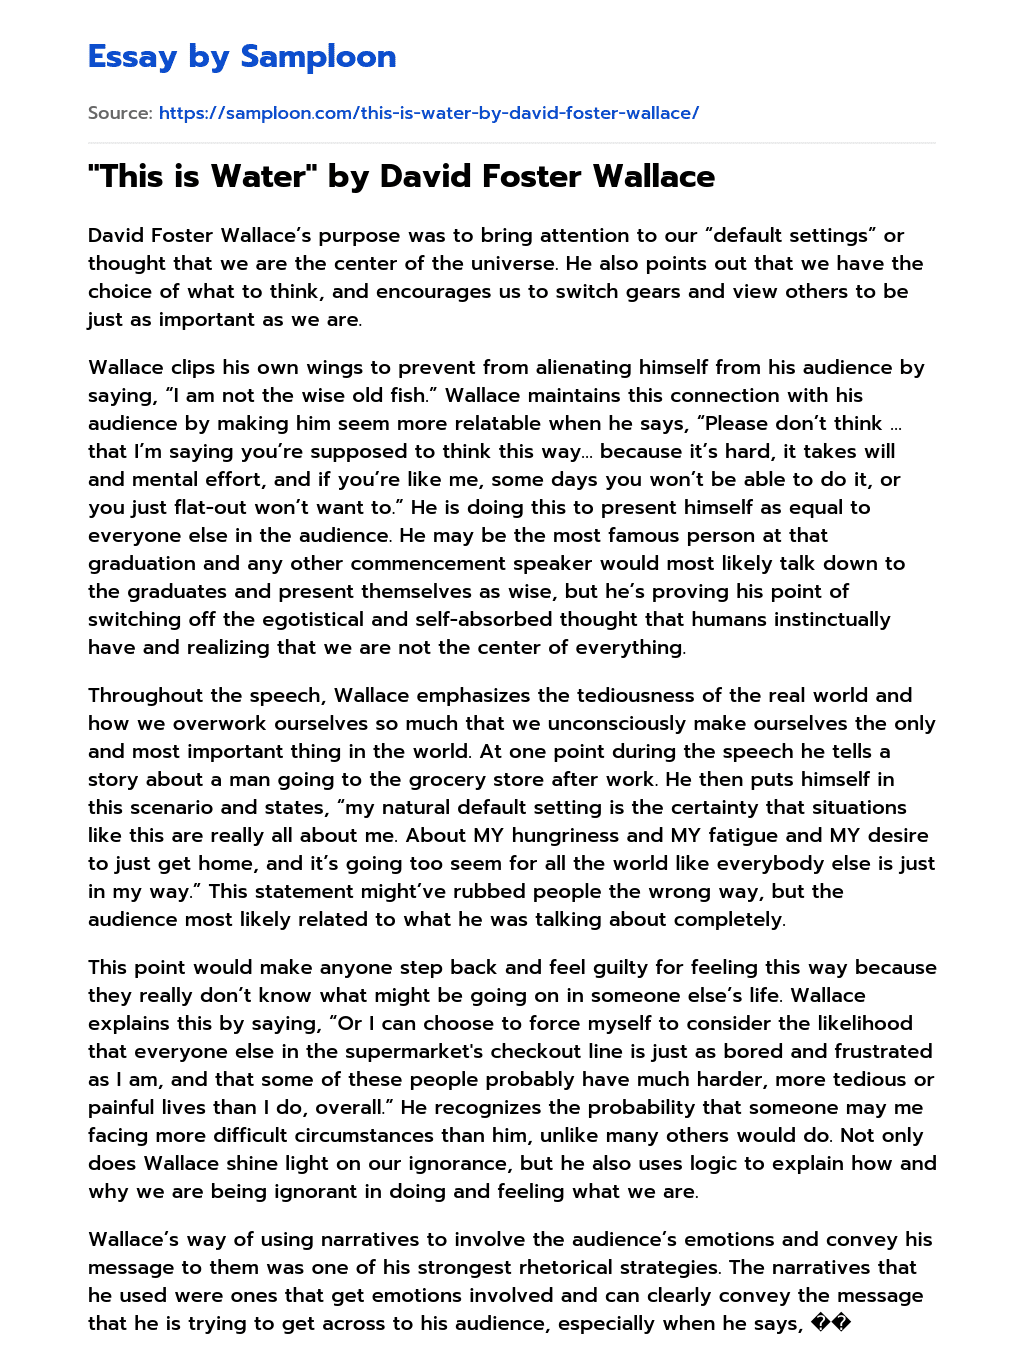 “This is Water” by David Foster Wallace Summary essay